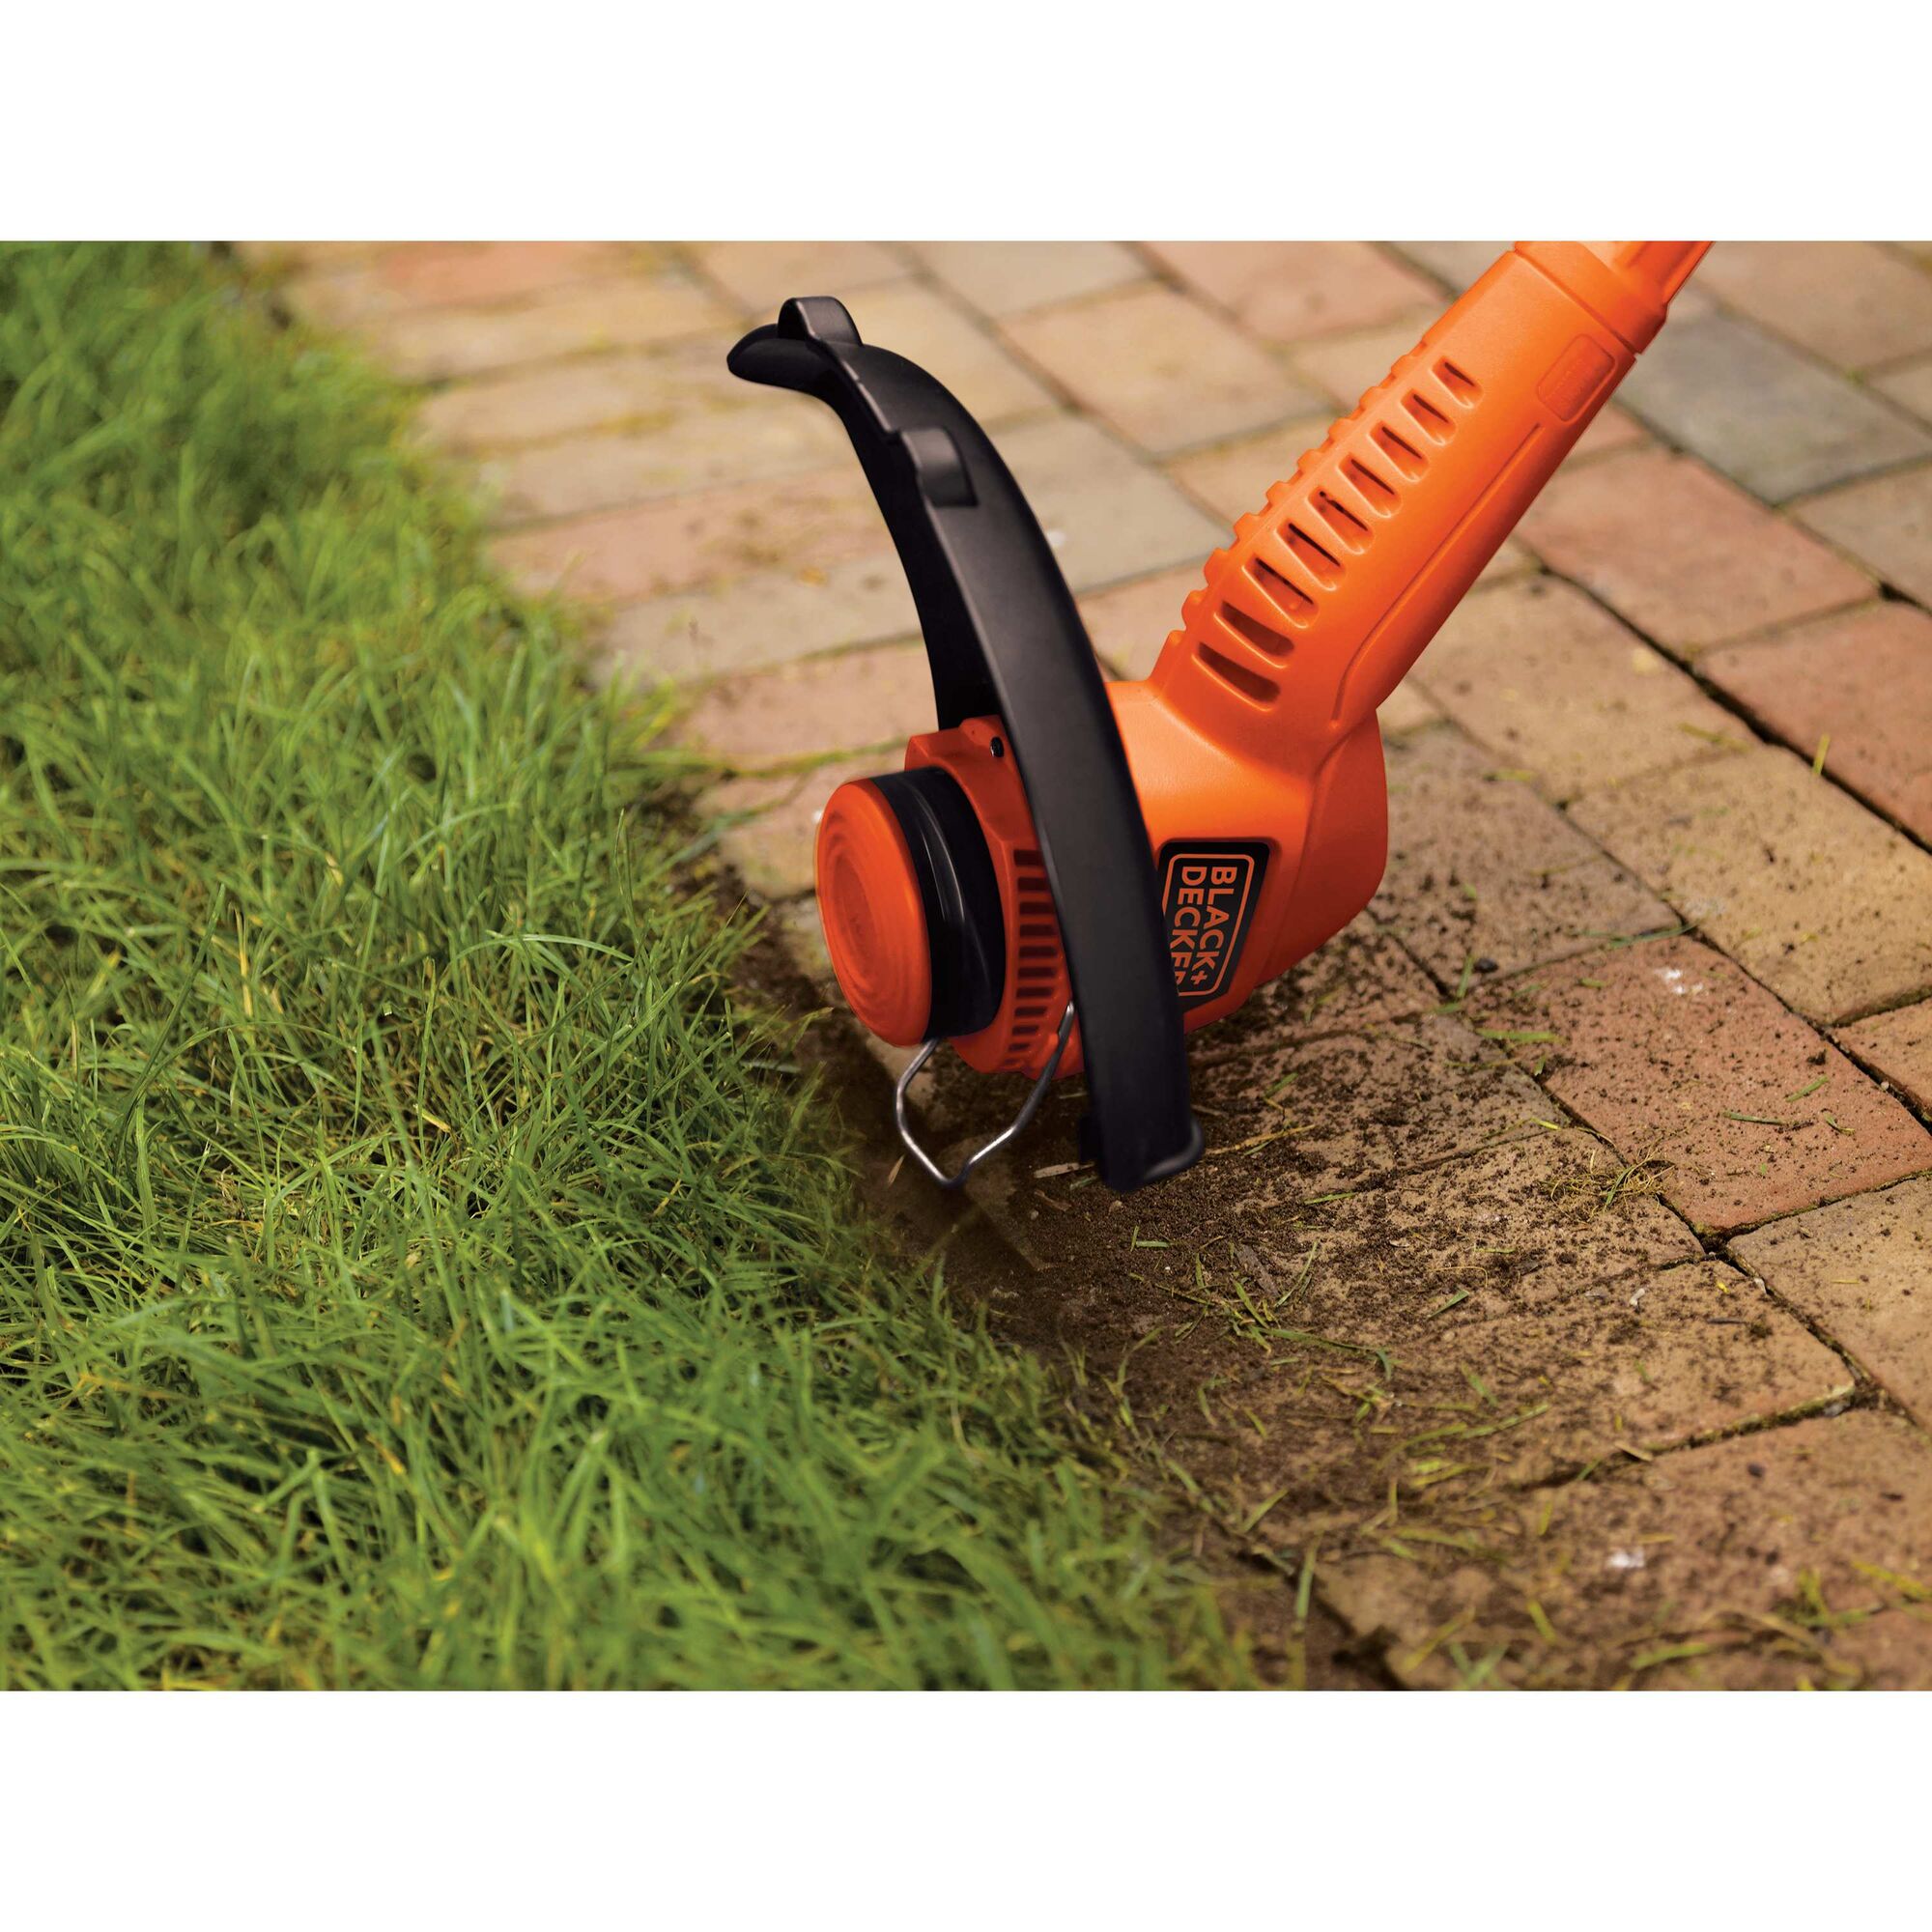 Close-up of 2-in-1 Electric Trimmer/Edger being used to edge next to a sidewalk.